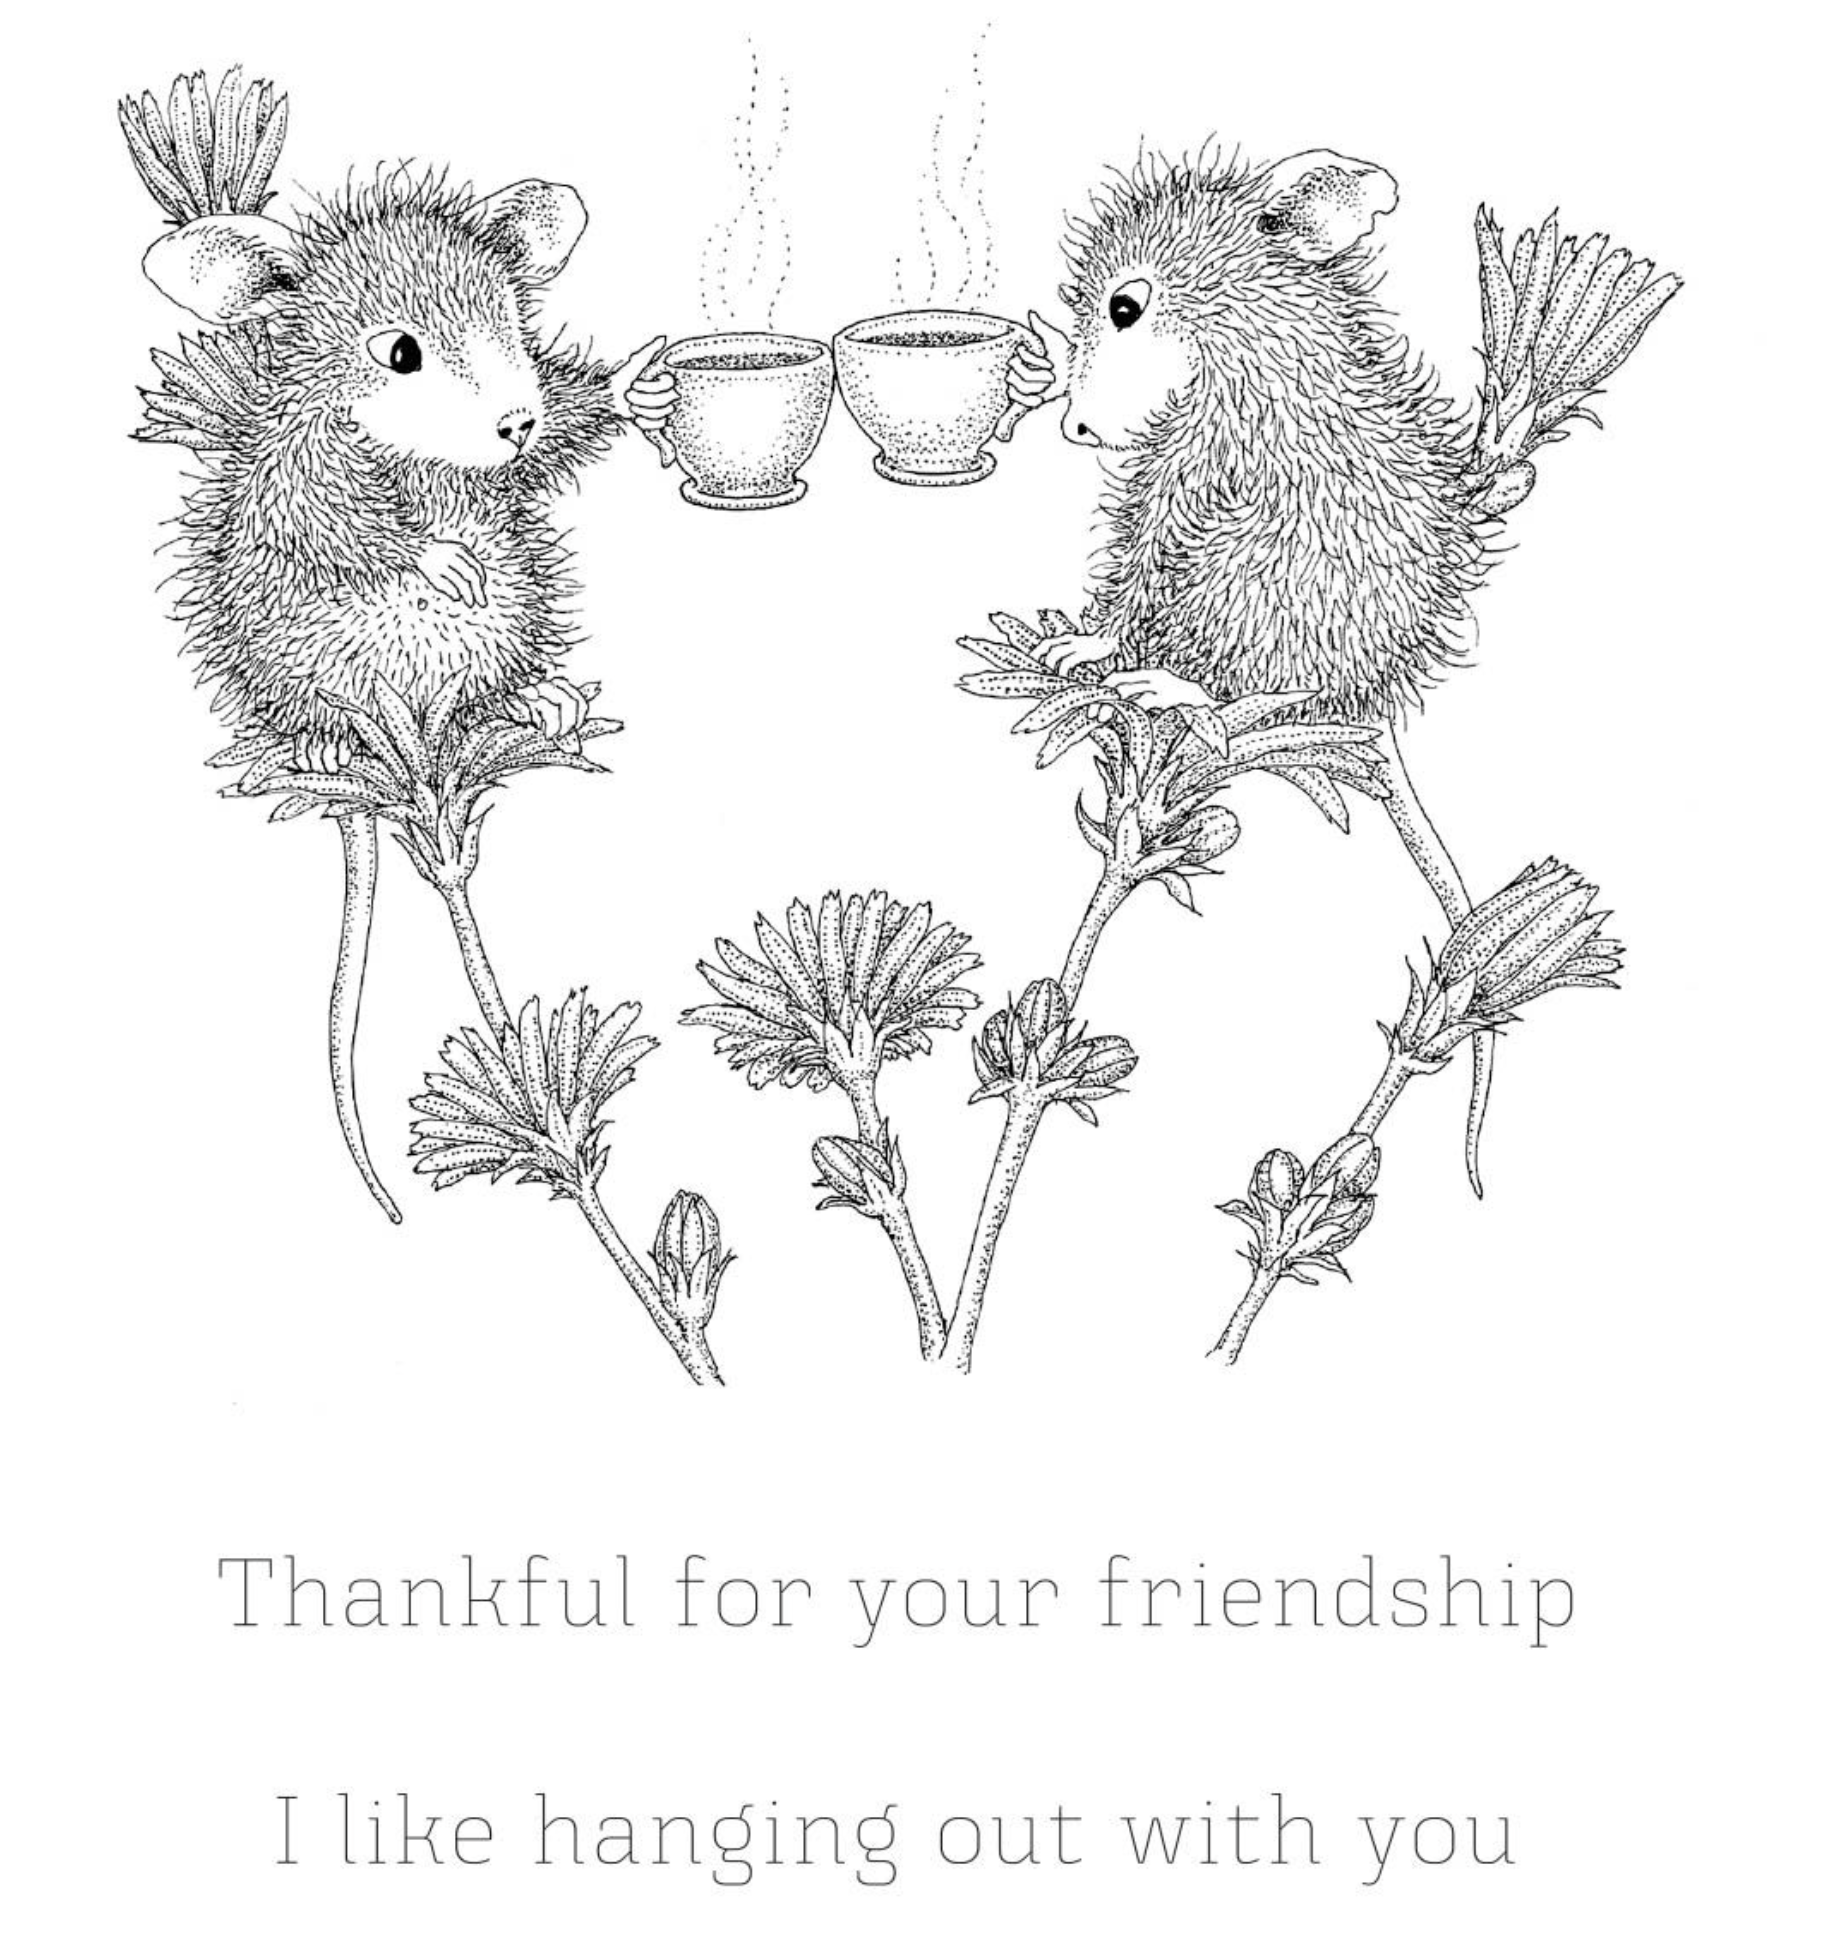 Spellbinders: House Mouse Tea For Two Cling Stamp Set